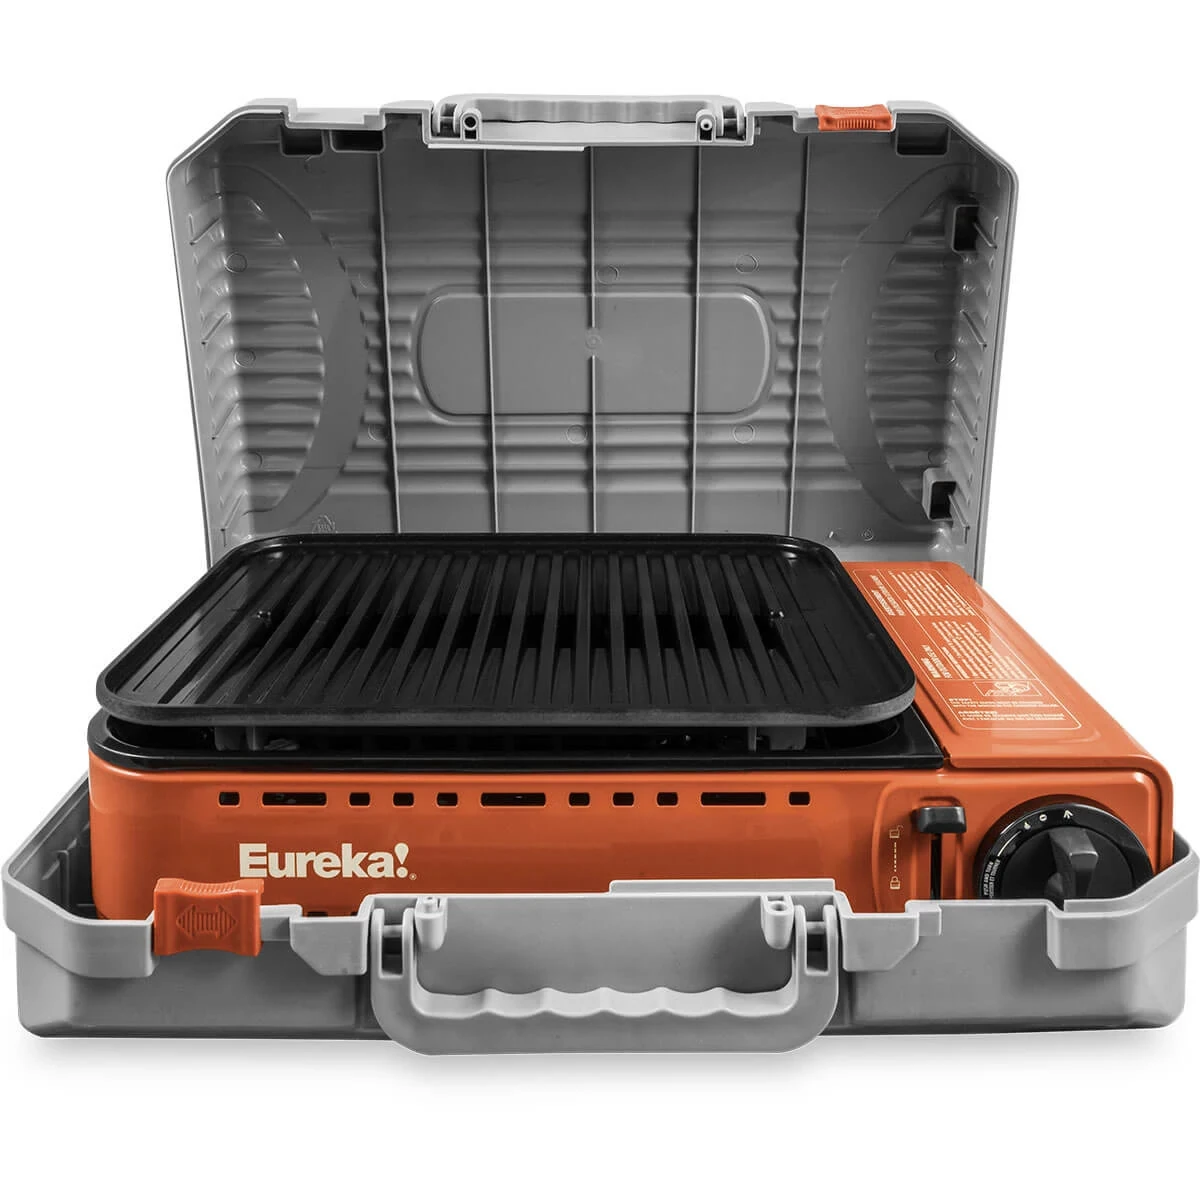 Compact SPRK Camp Grill™, all-in-one design